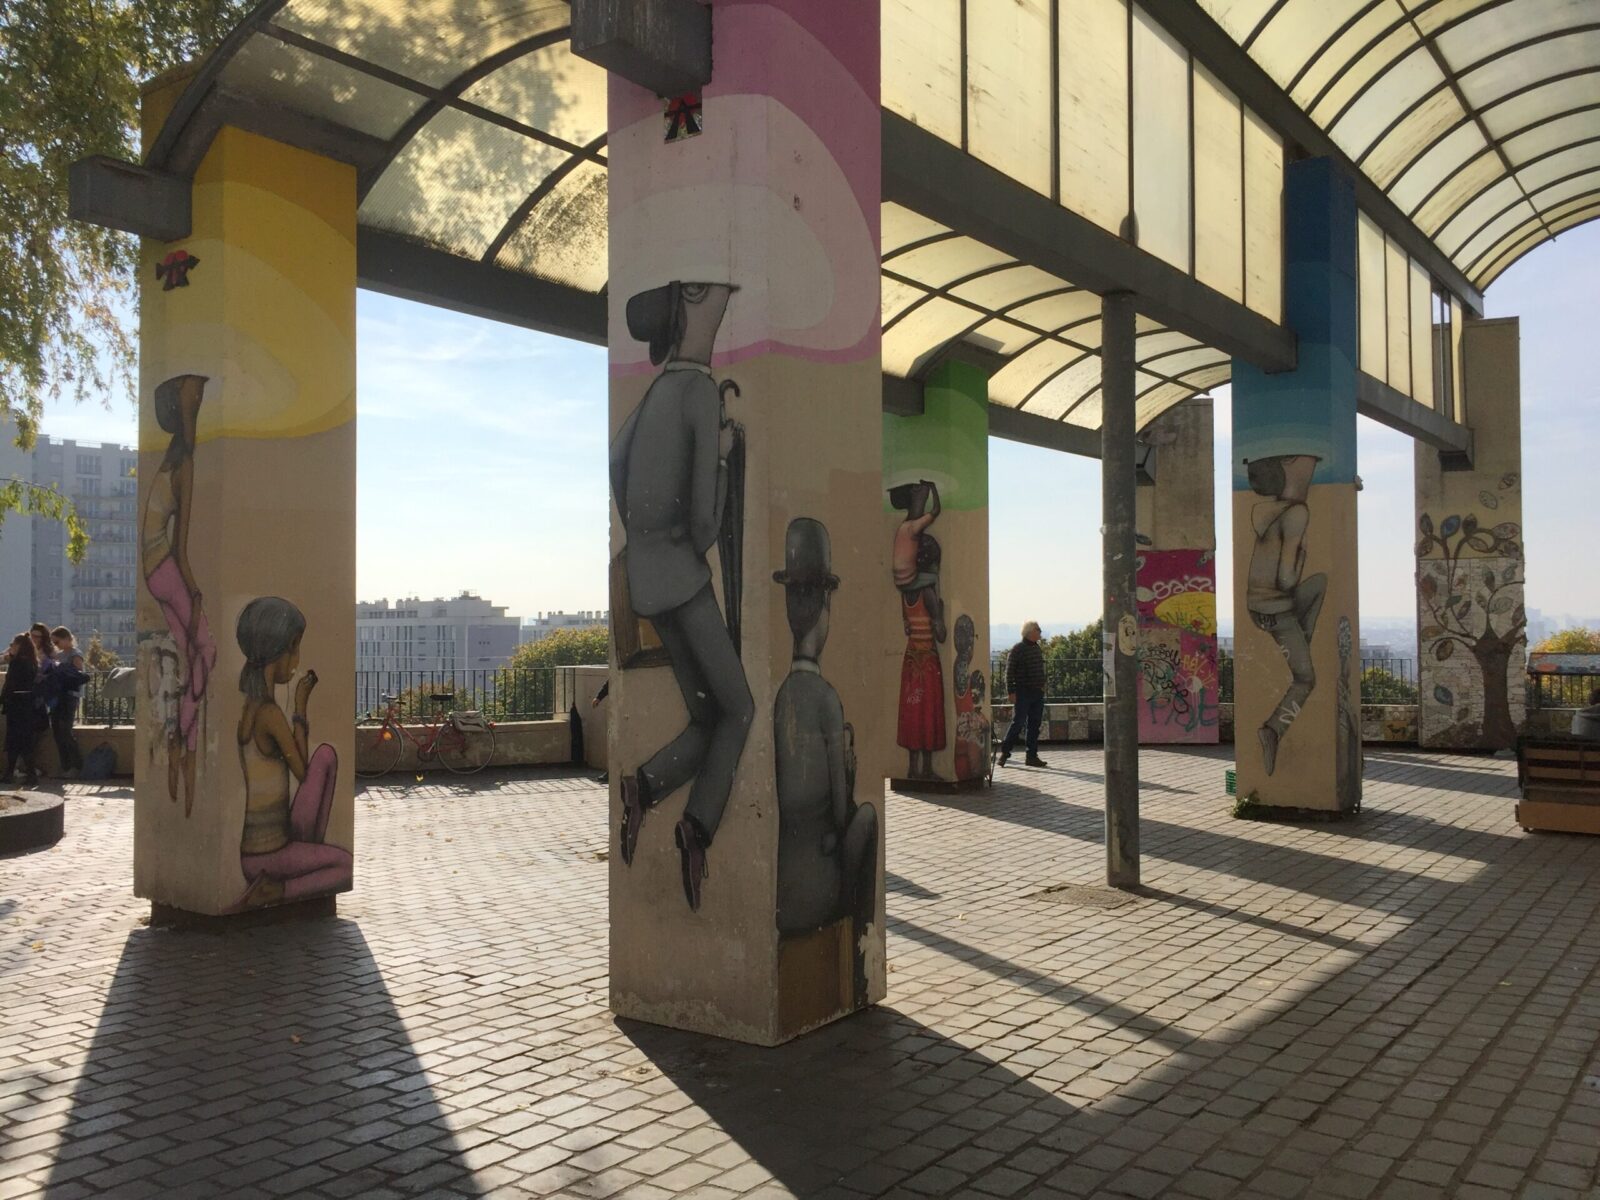 Columns with street art paintings